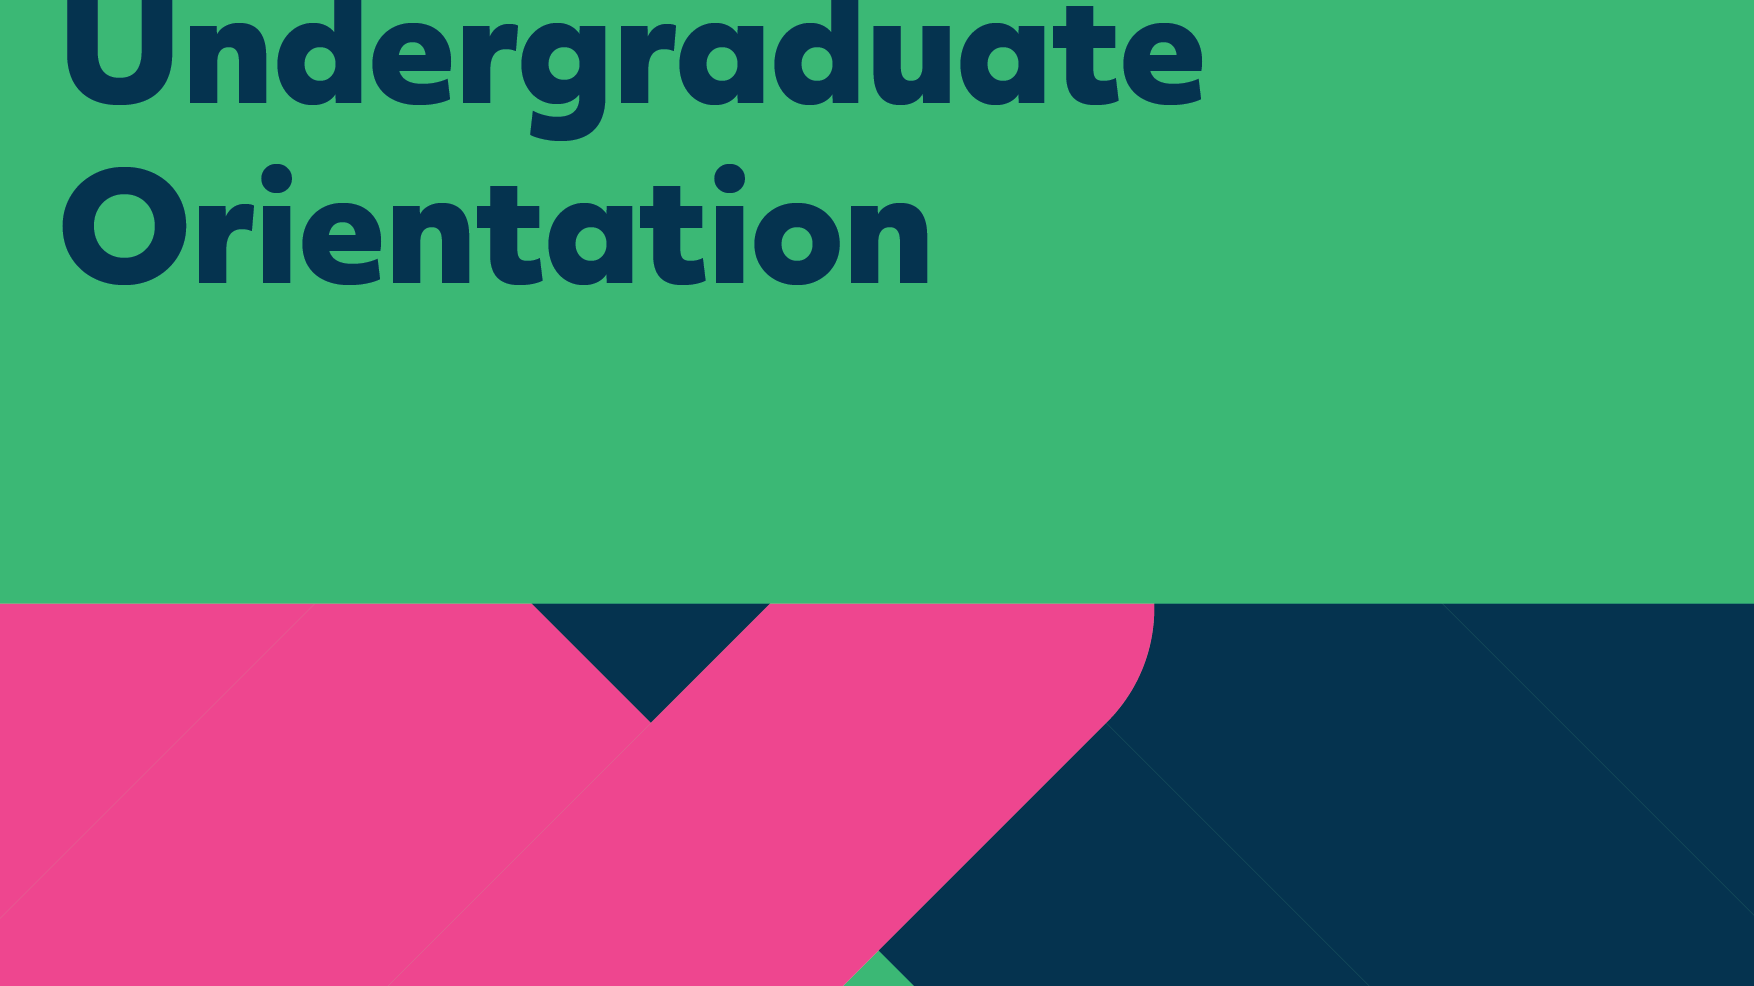 An illustration which reads 'Undergraduate Orientation', signposting information for new 1st year students